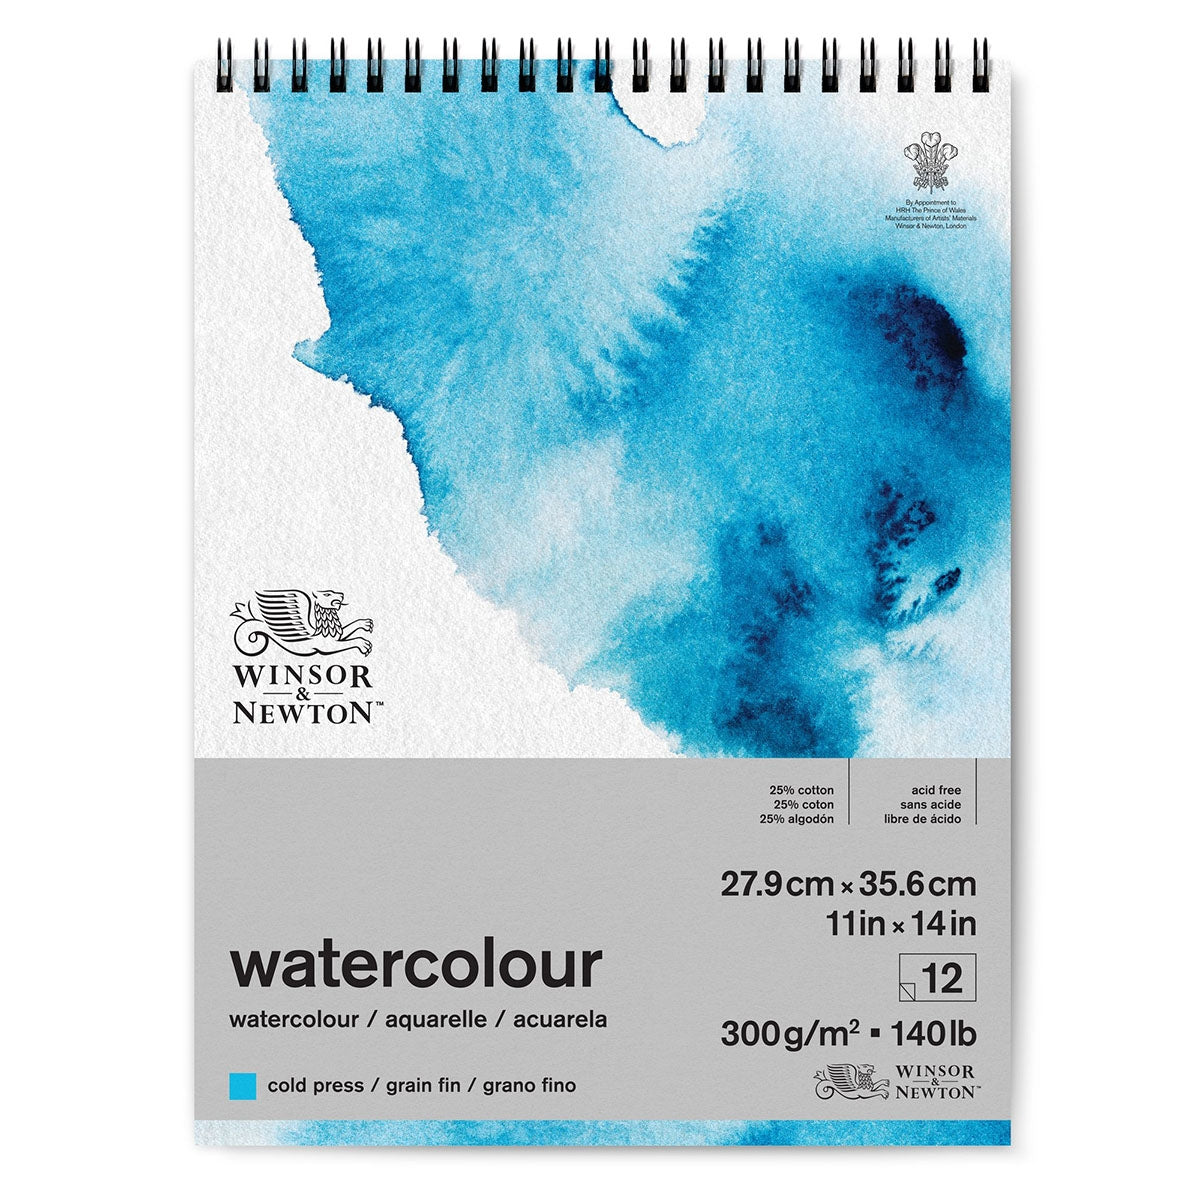 Winsor & Newton - Watercolour Pad - Spiral - Cold Pressed 11x14" 300gsm